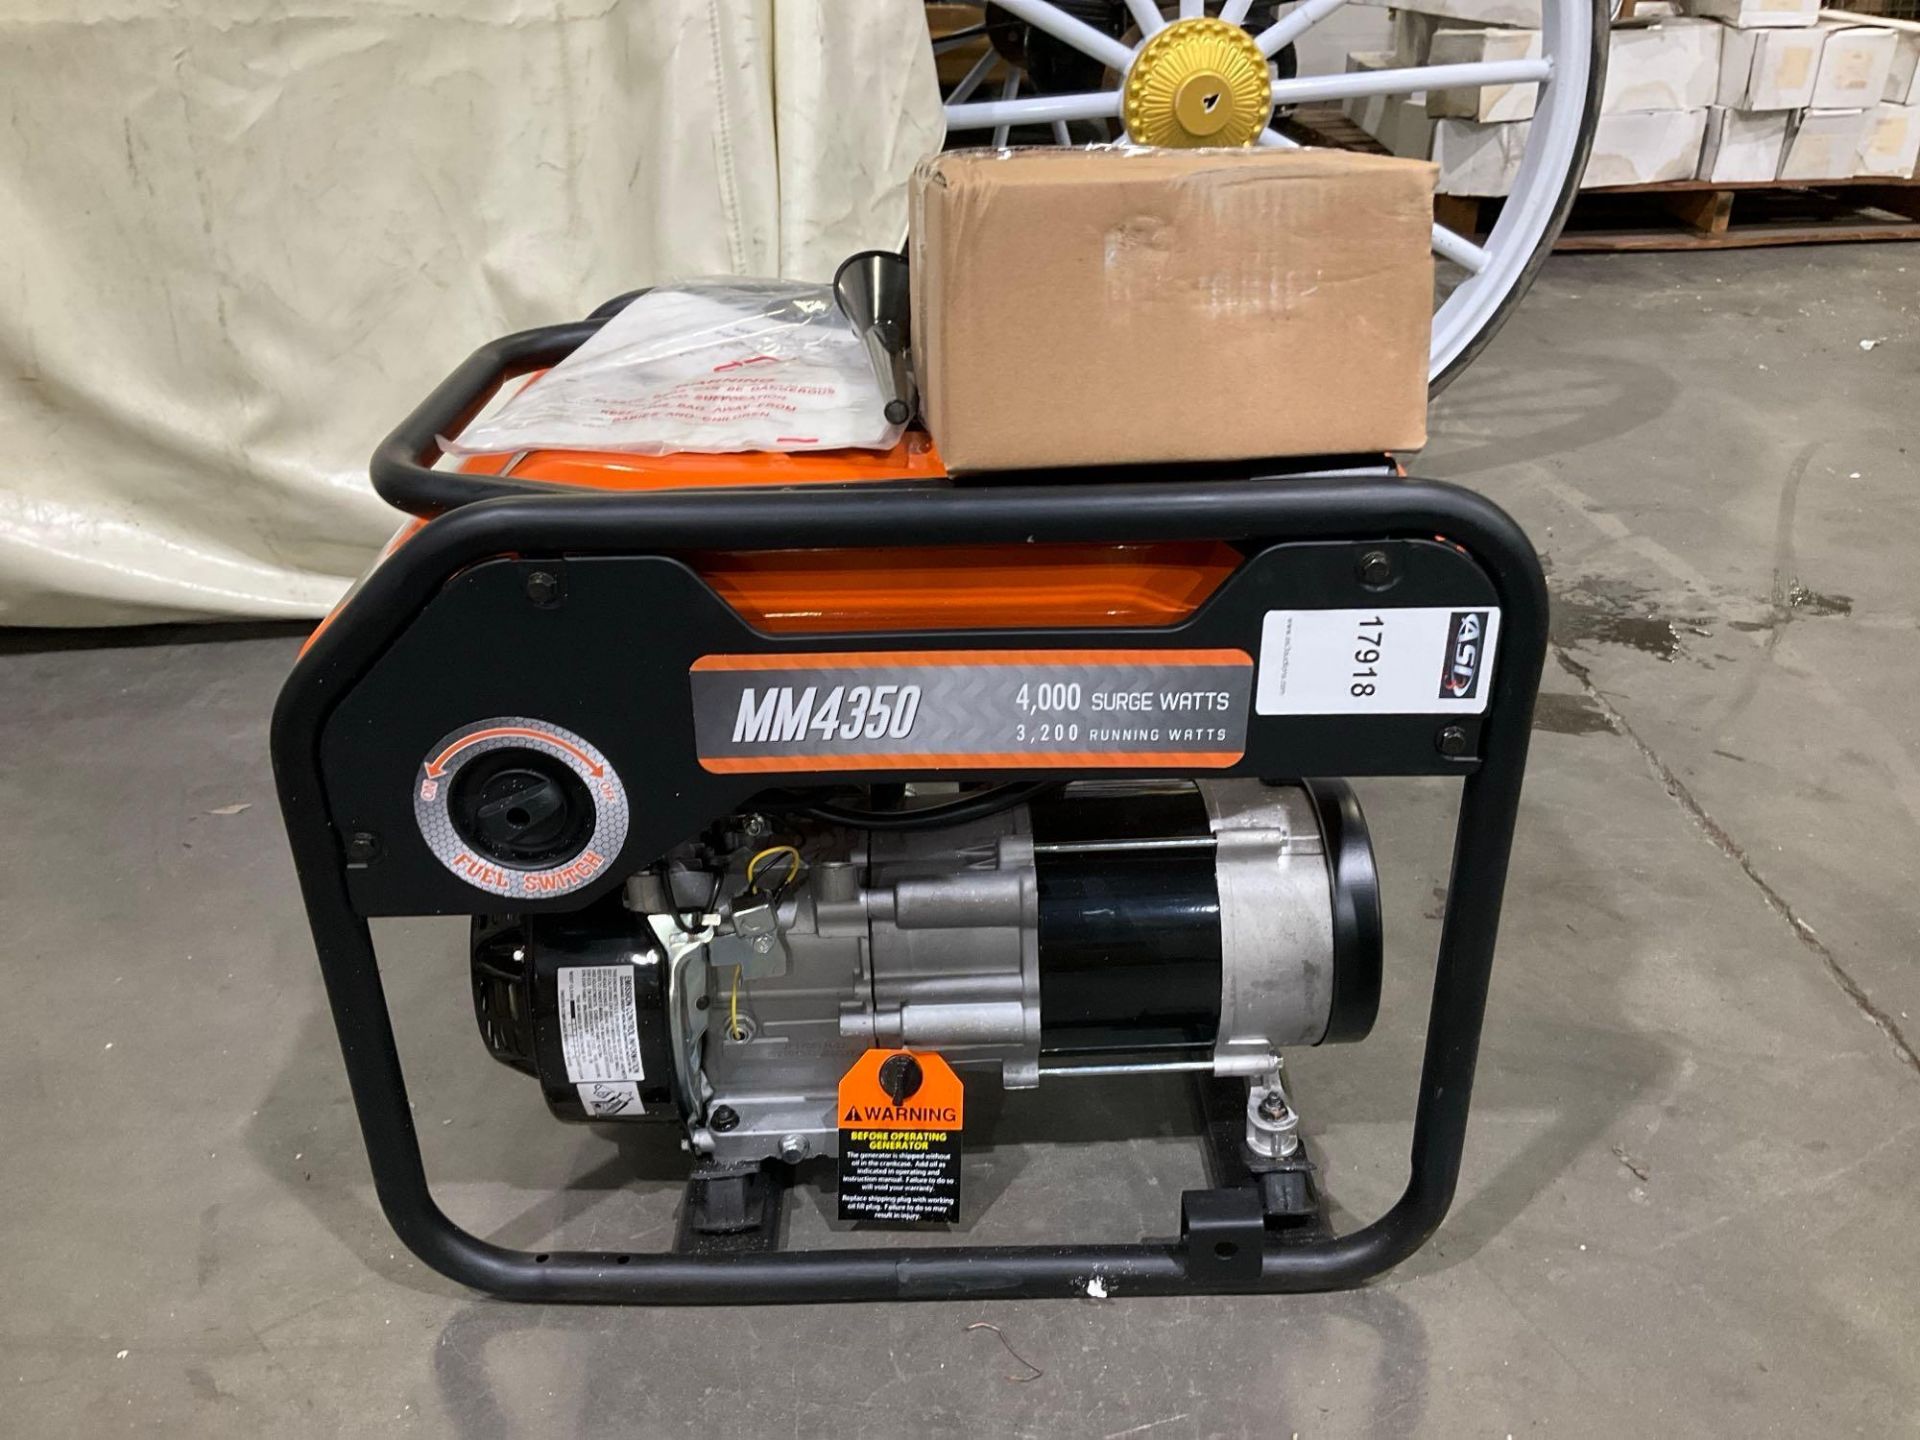 UNUSED MECH MARVELS MM4350 PORTABLE GAS GENERATOR, APPROX 4000 SURGE WATTS - Image 2 of 9